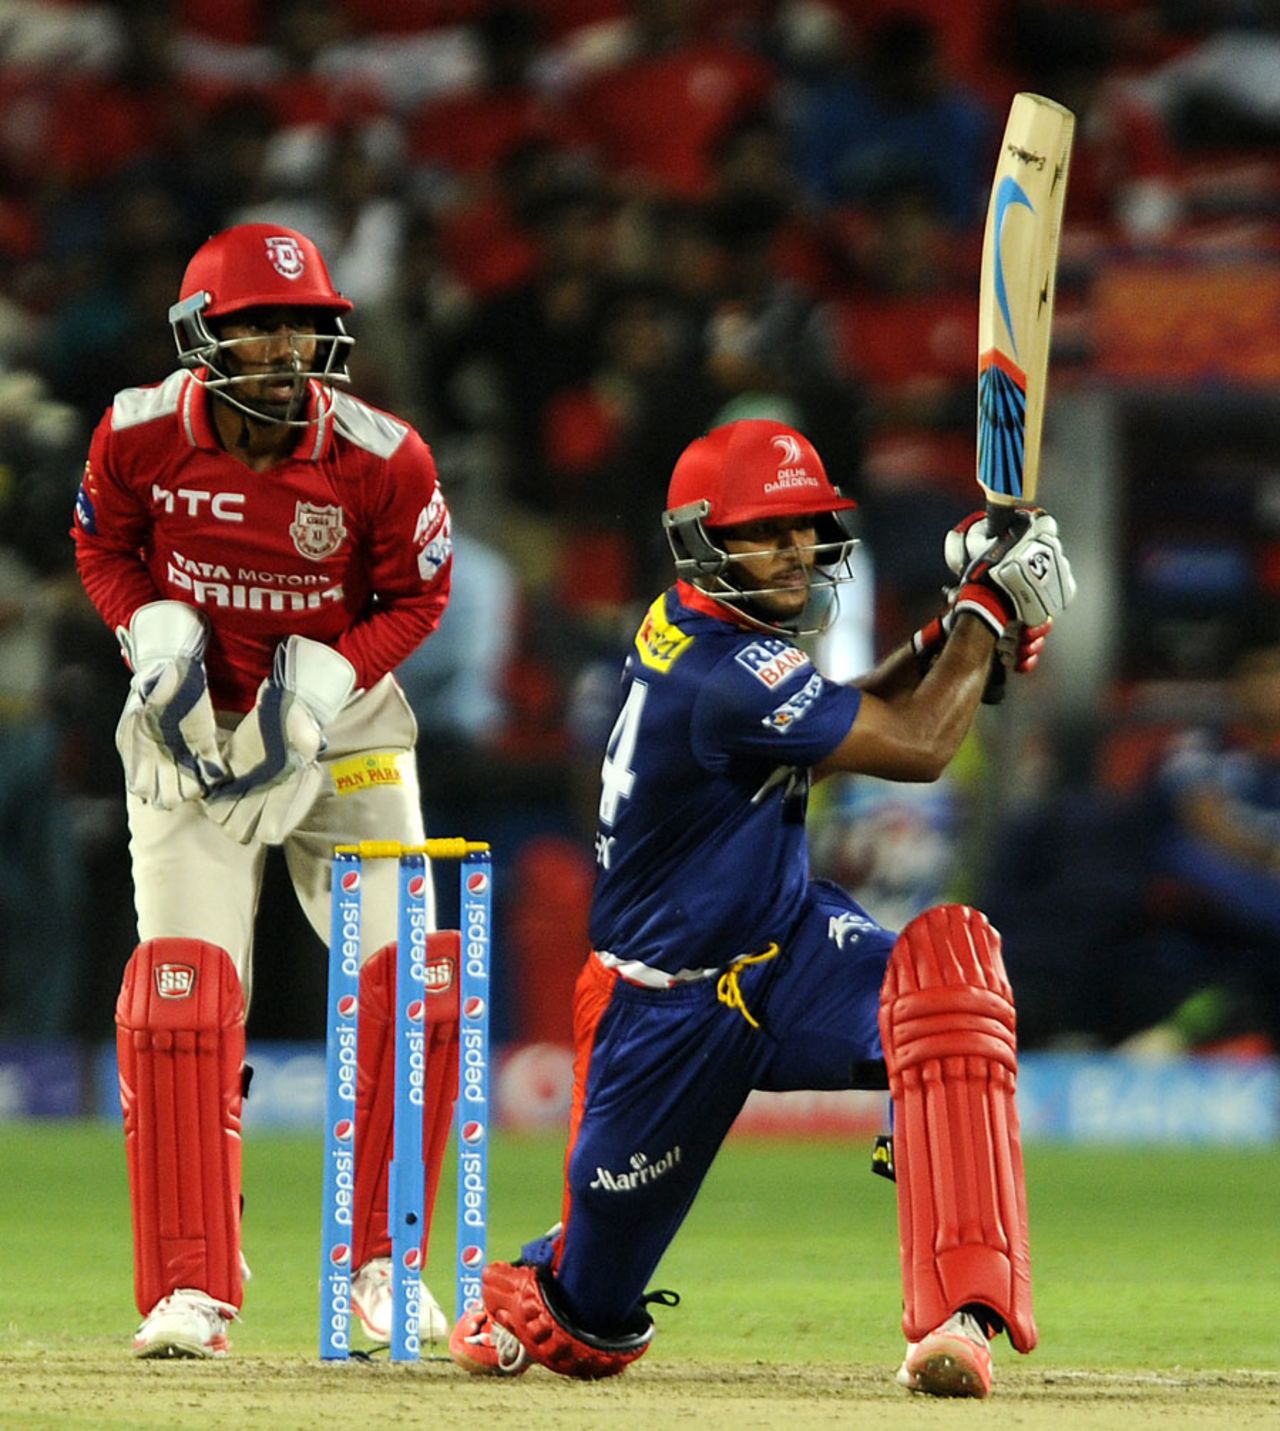 Mayank Agarwal punched seven fours and two sixes, Kings XI Punjab v Delhi Daredevils, IPL 2015, Pune, April 15, 2015